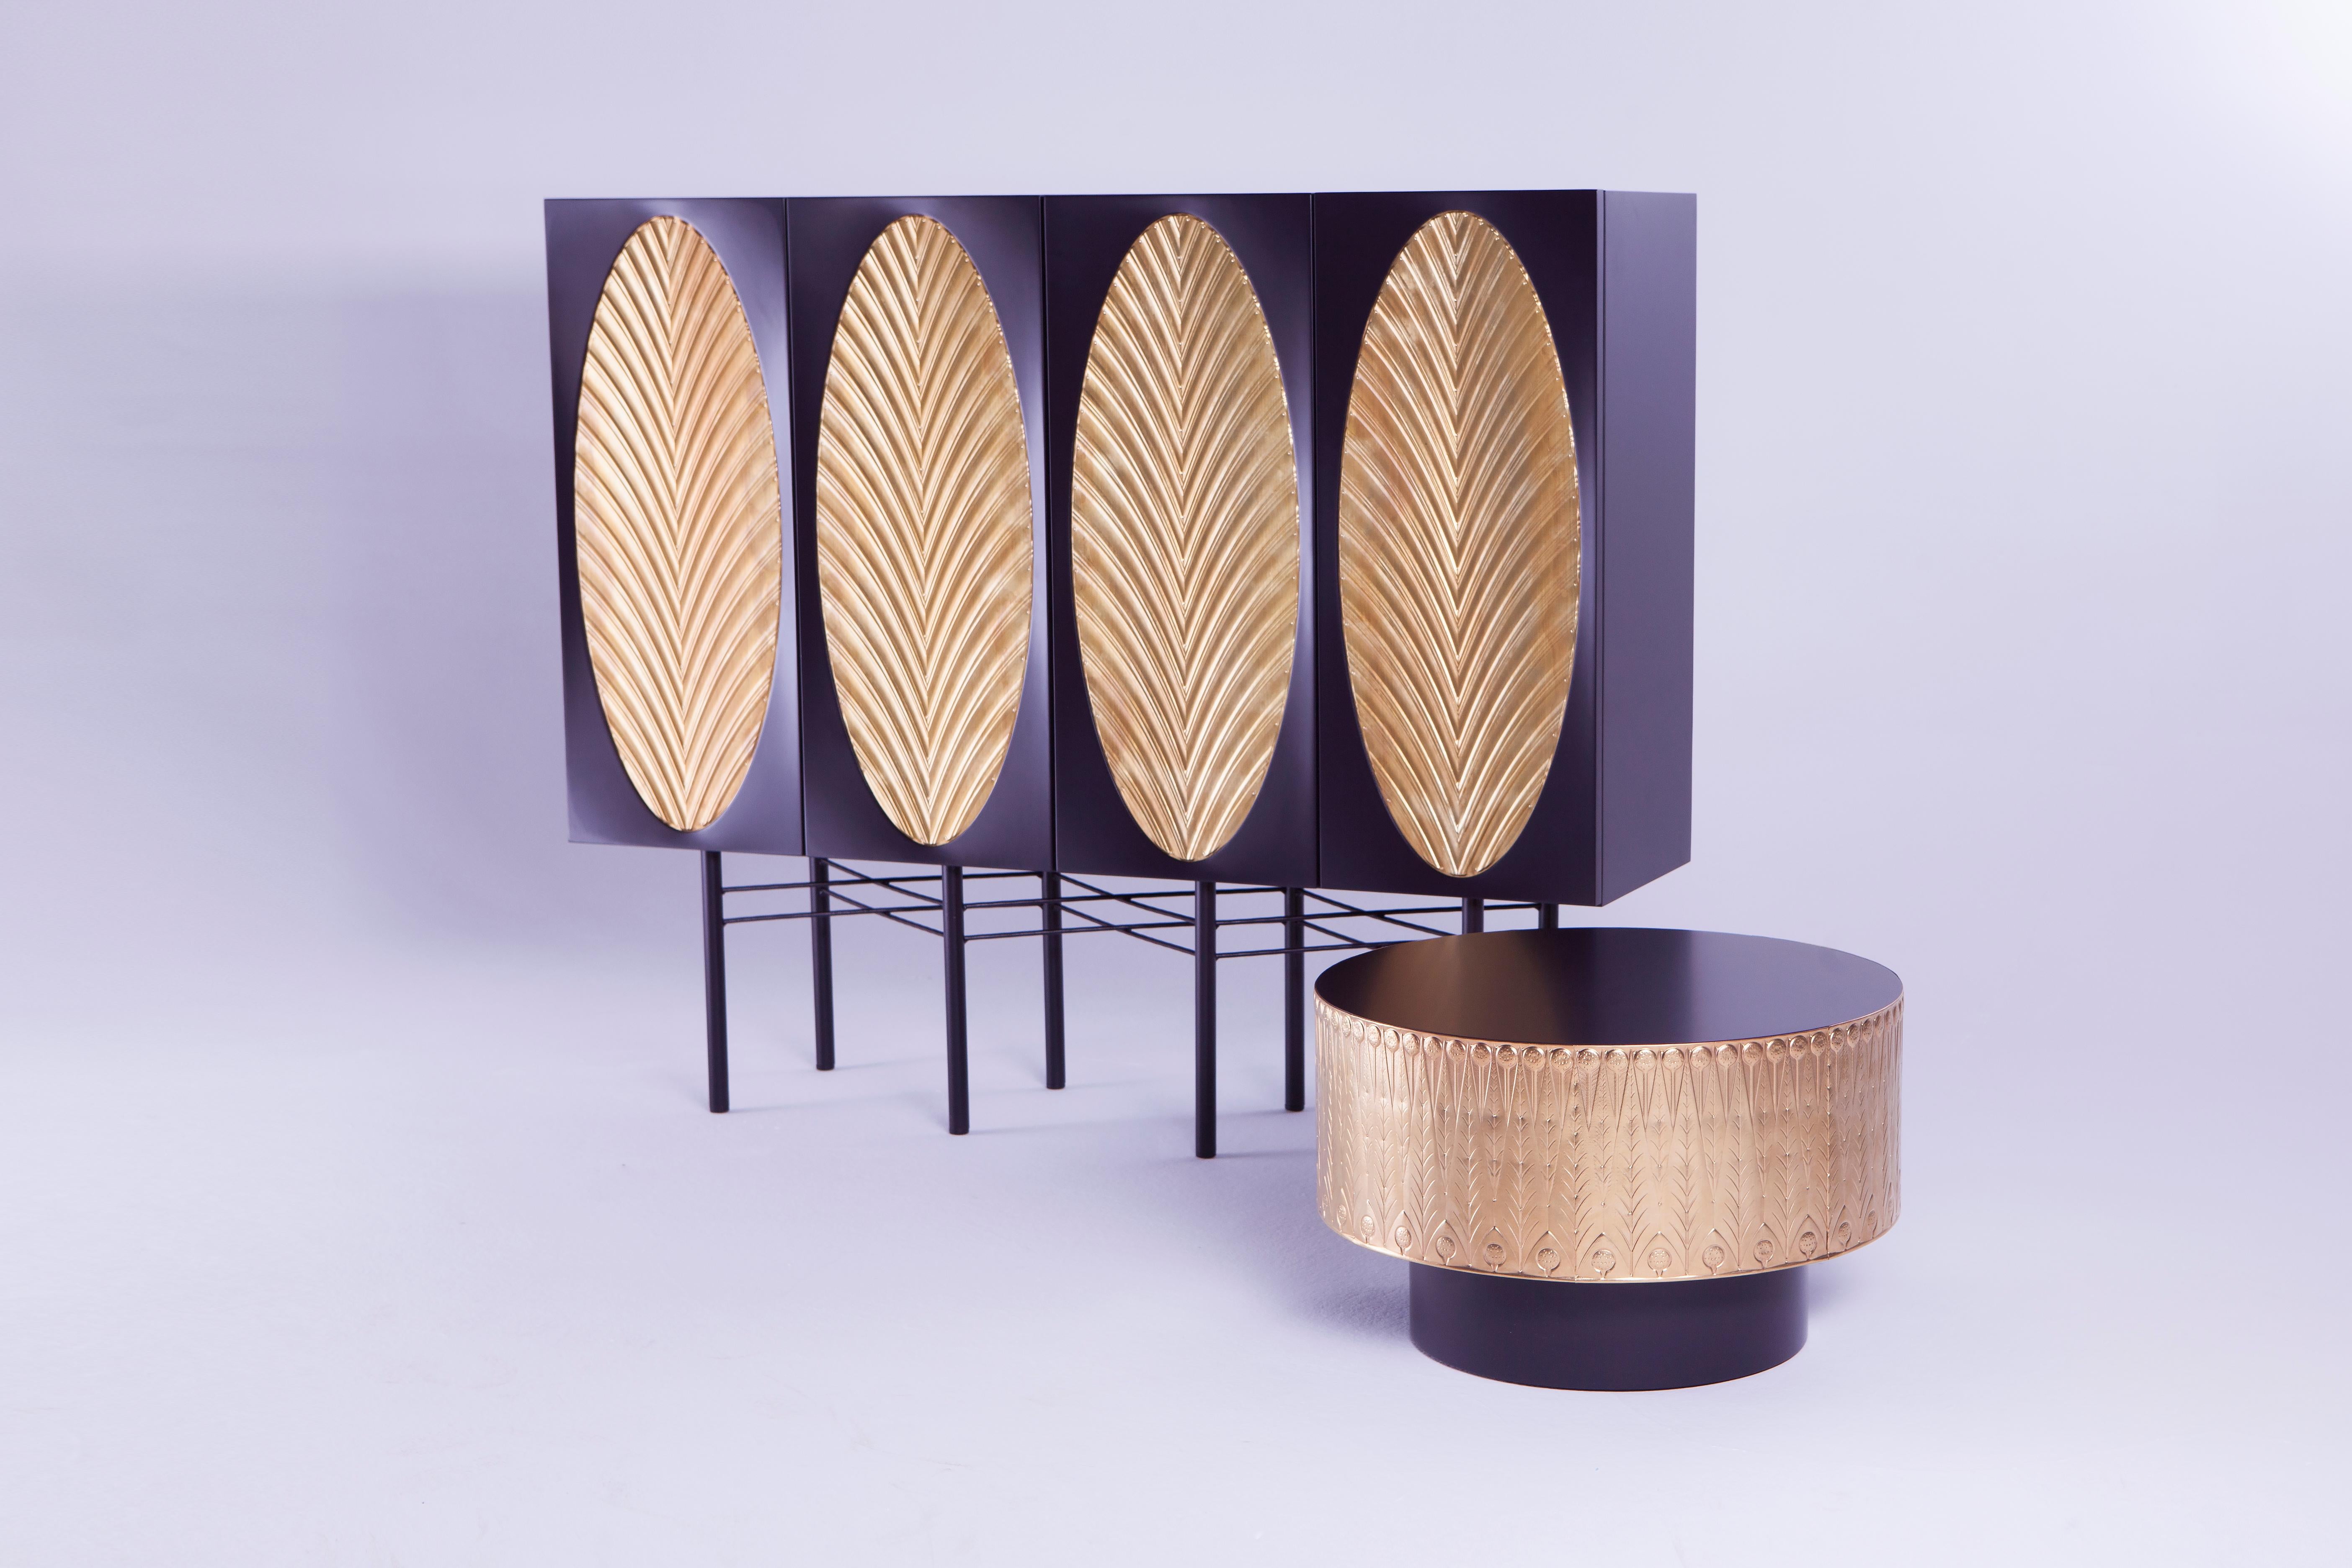 Branches brass cabinet signed by Ivan Basov
Material: Brass
Dimensions: 114 x 136 x 36 cm
Can be made to order in different dimensions

Ivan Basov is one of the leading figure of the contemporary Russian collectible design.
He is a member of